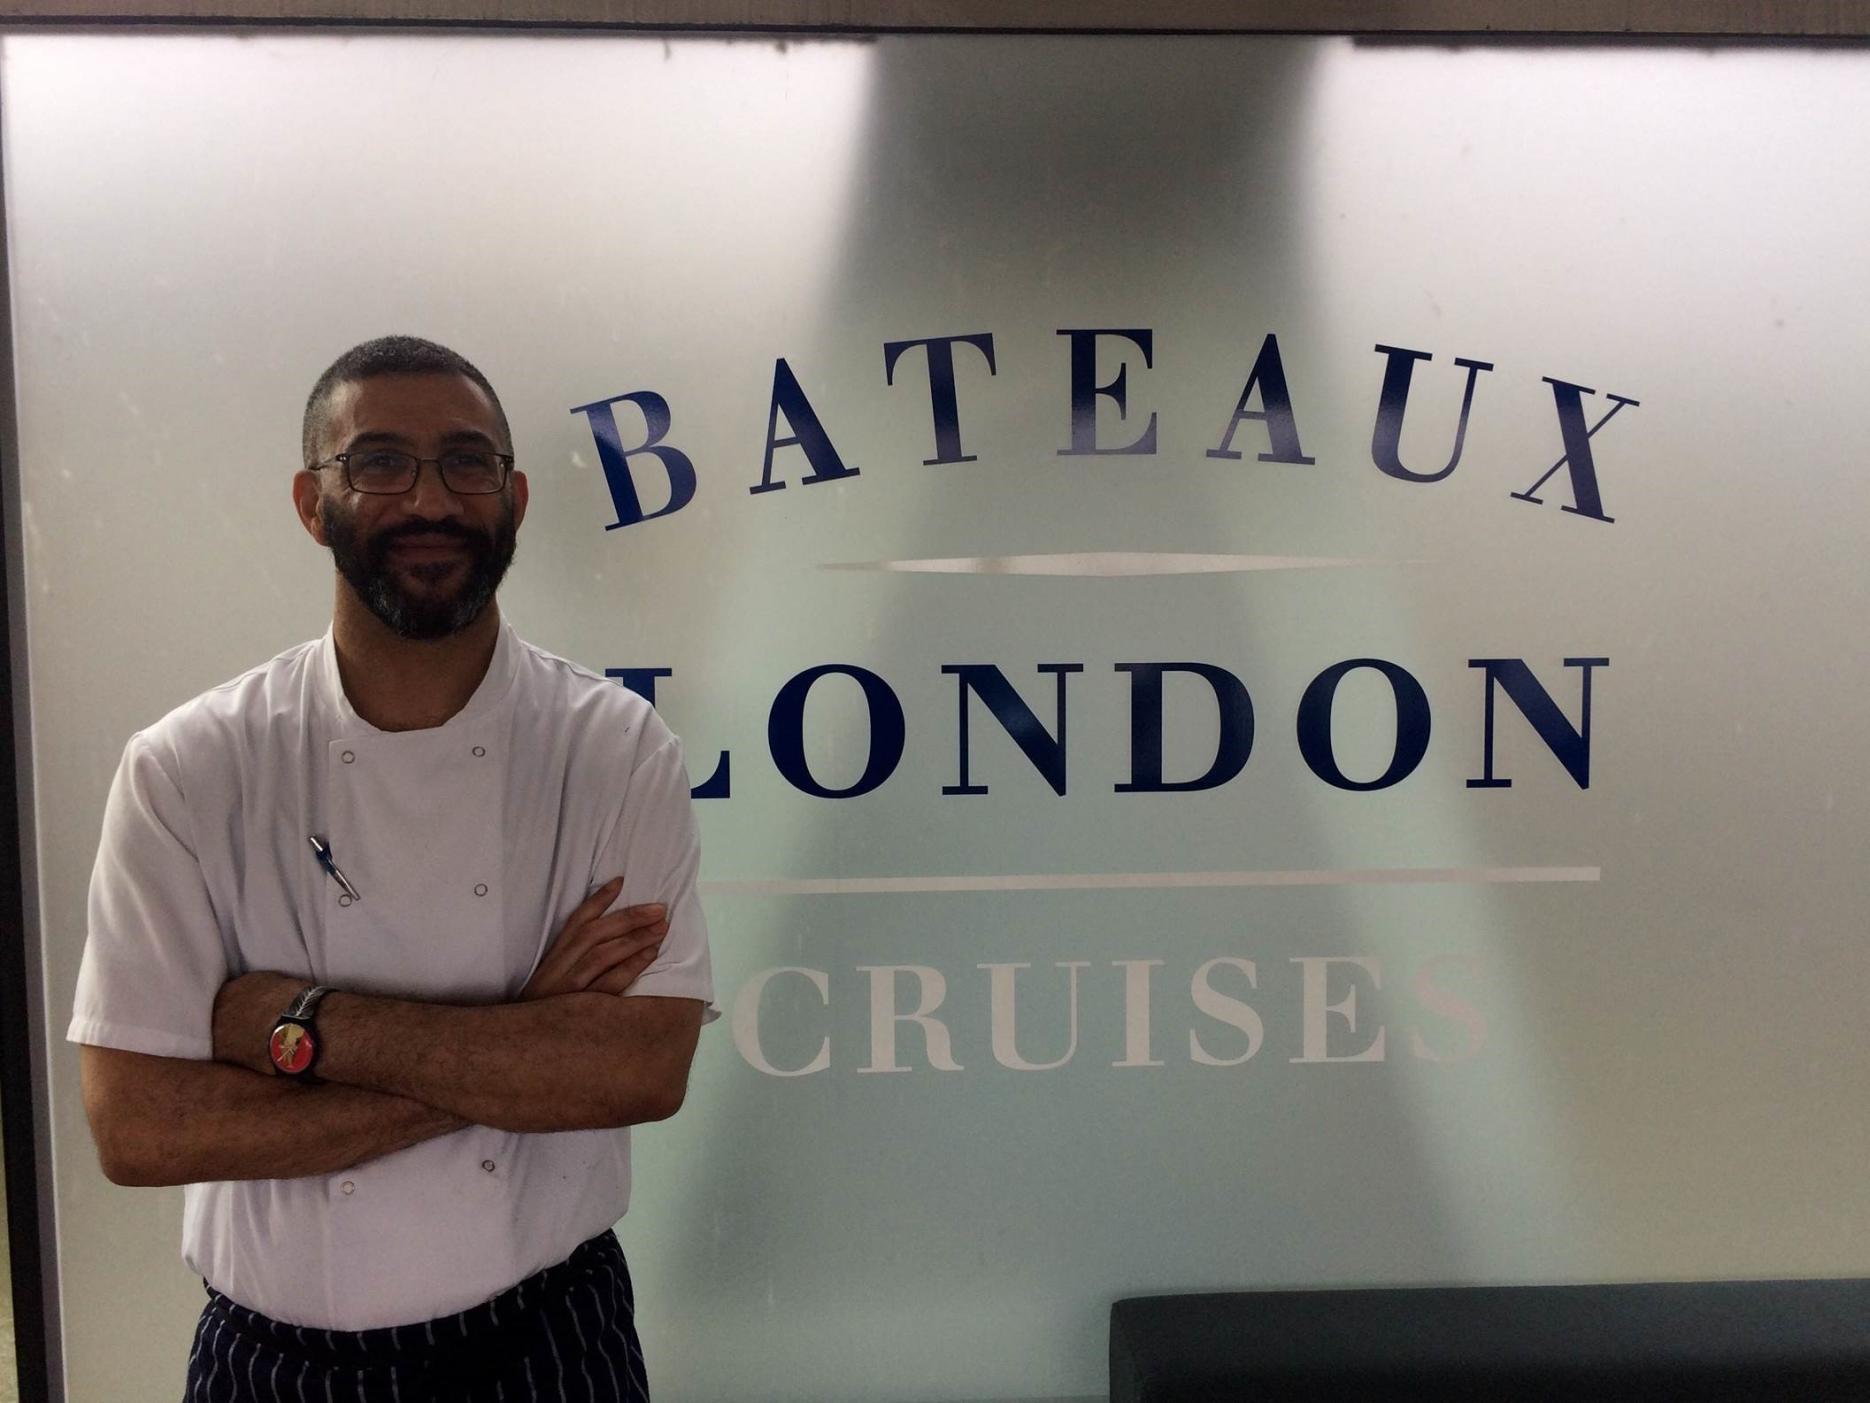 Bateaux London appoints Gary White as head chef